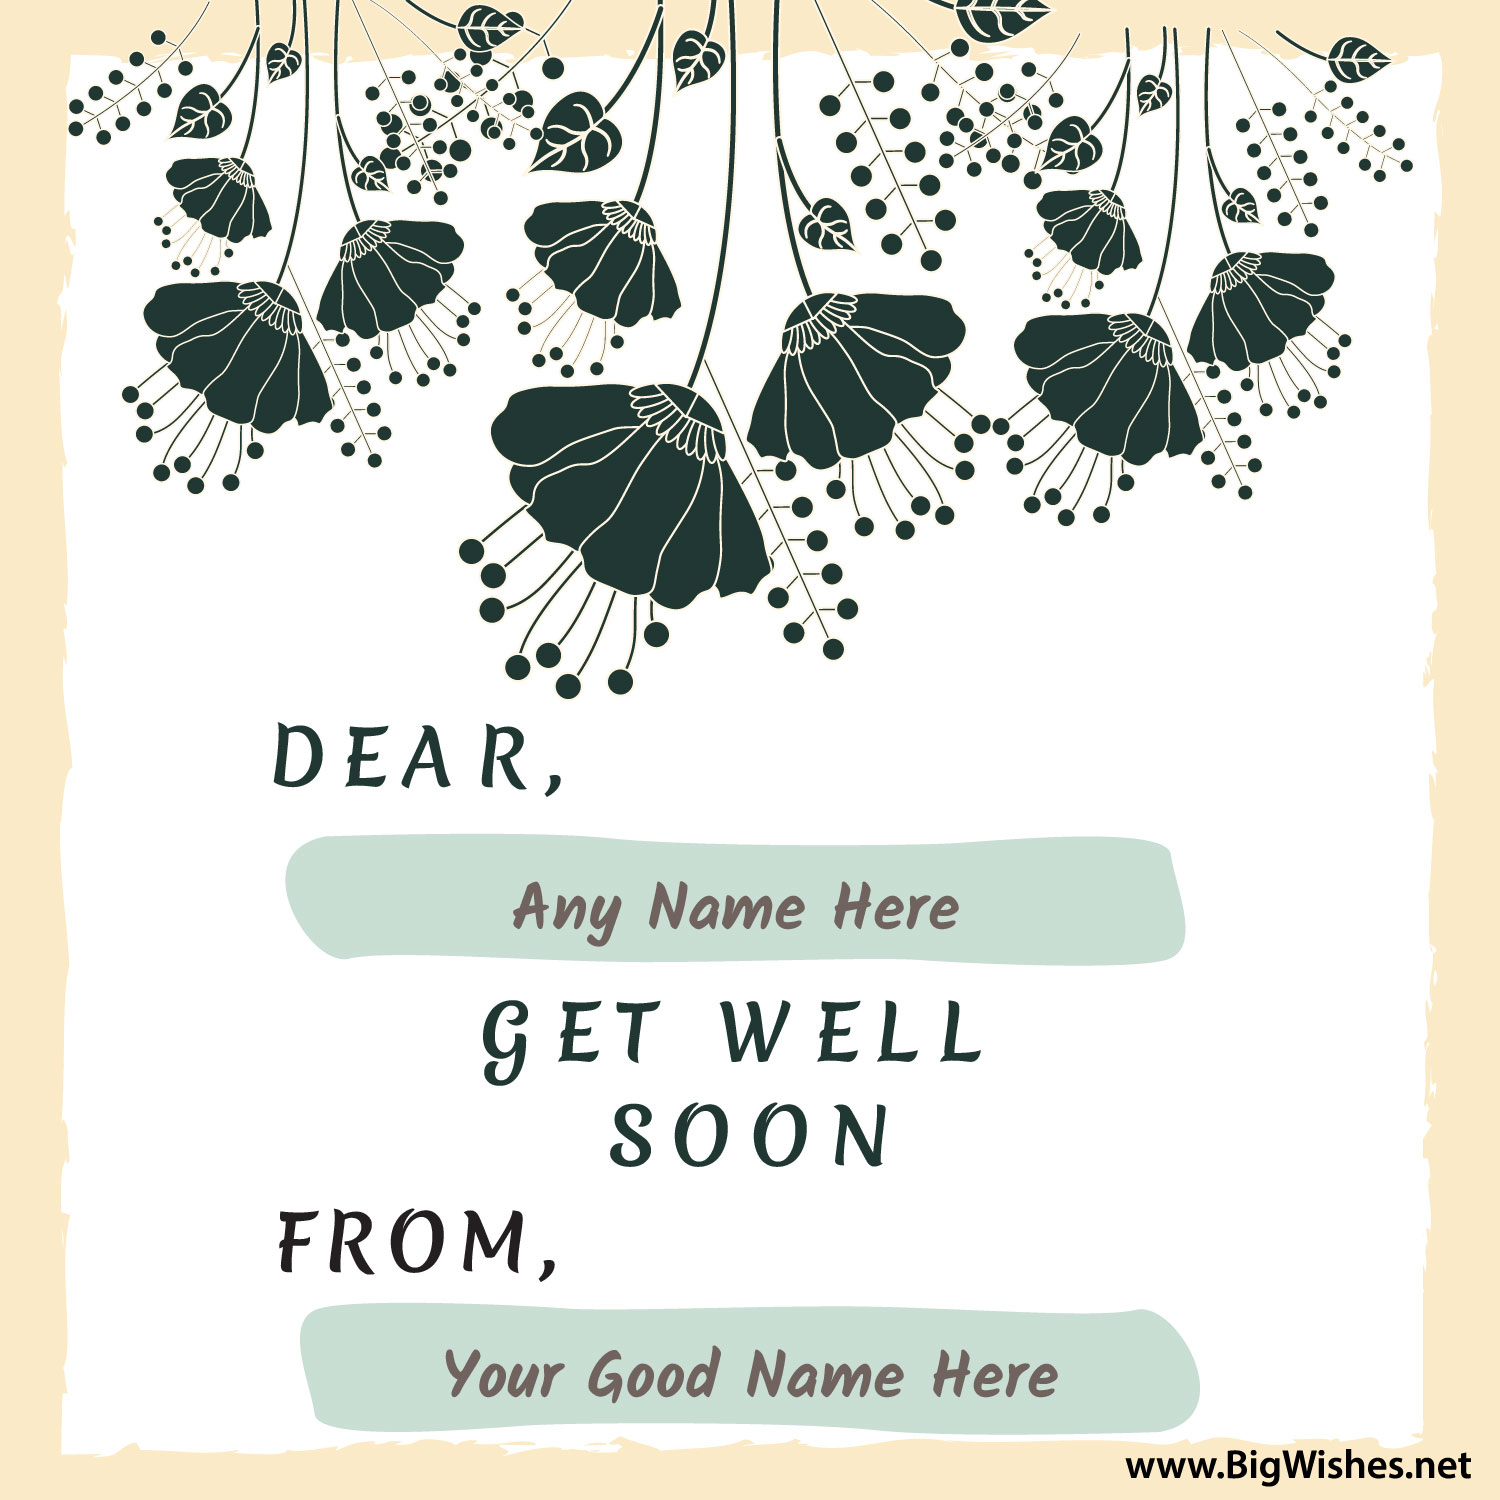 Get Well Soon Wishes Image for a Friend